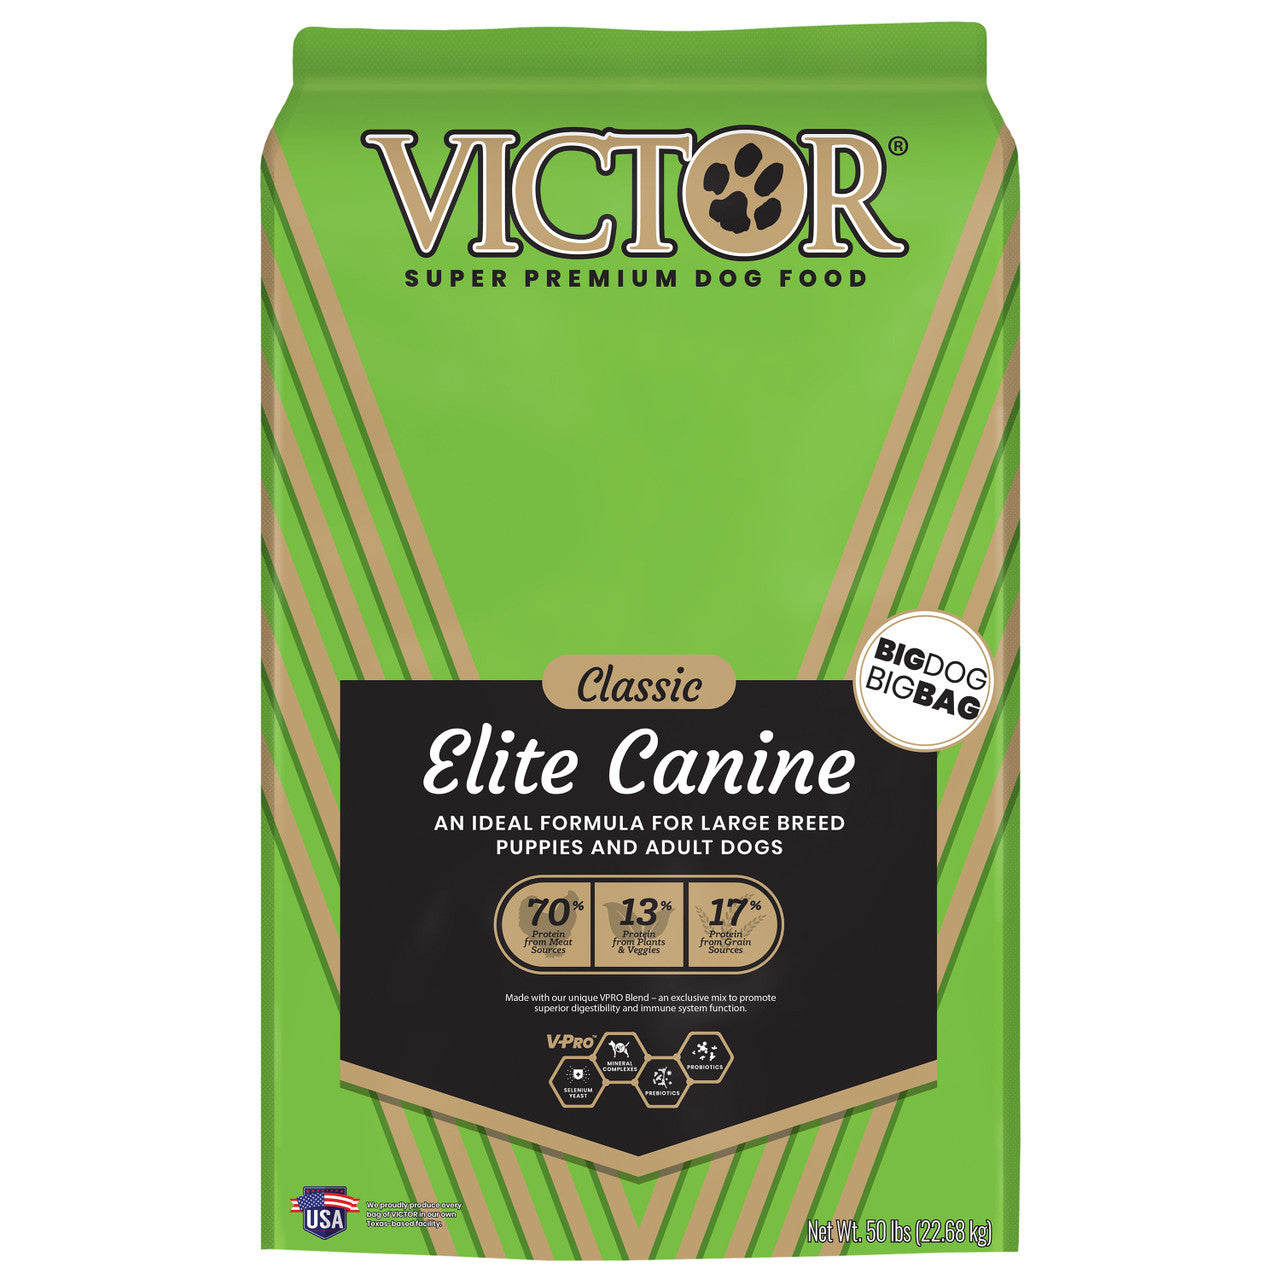 Victor Super Premium Dog Food Classic Elite Canine Large Breed Dry Dog Food Chicken & Rice 50lb